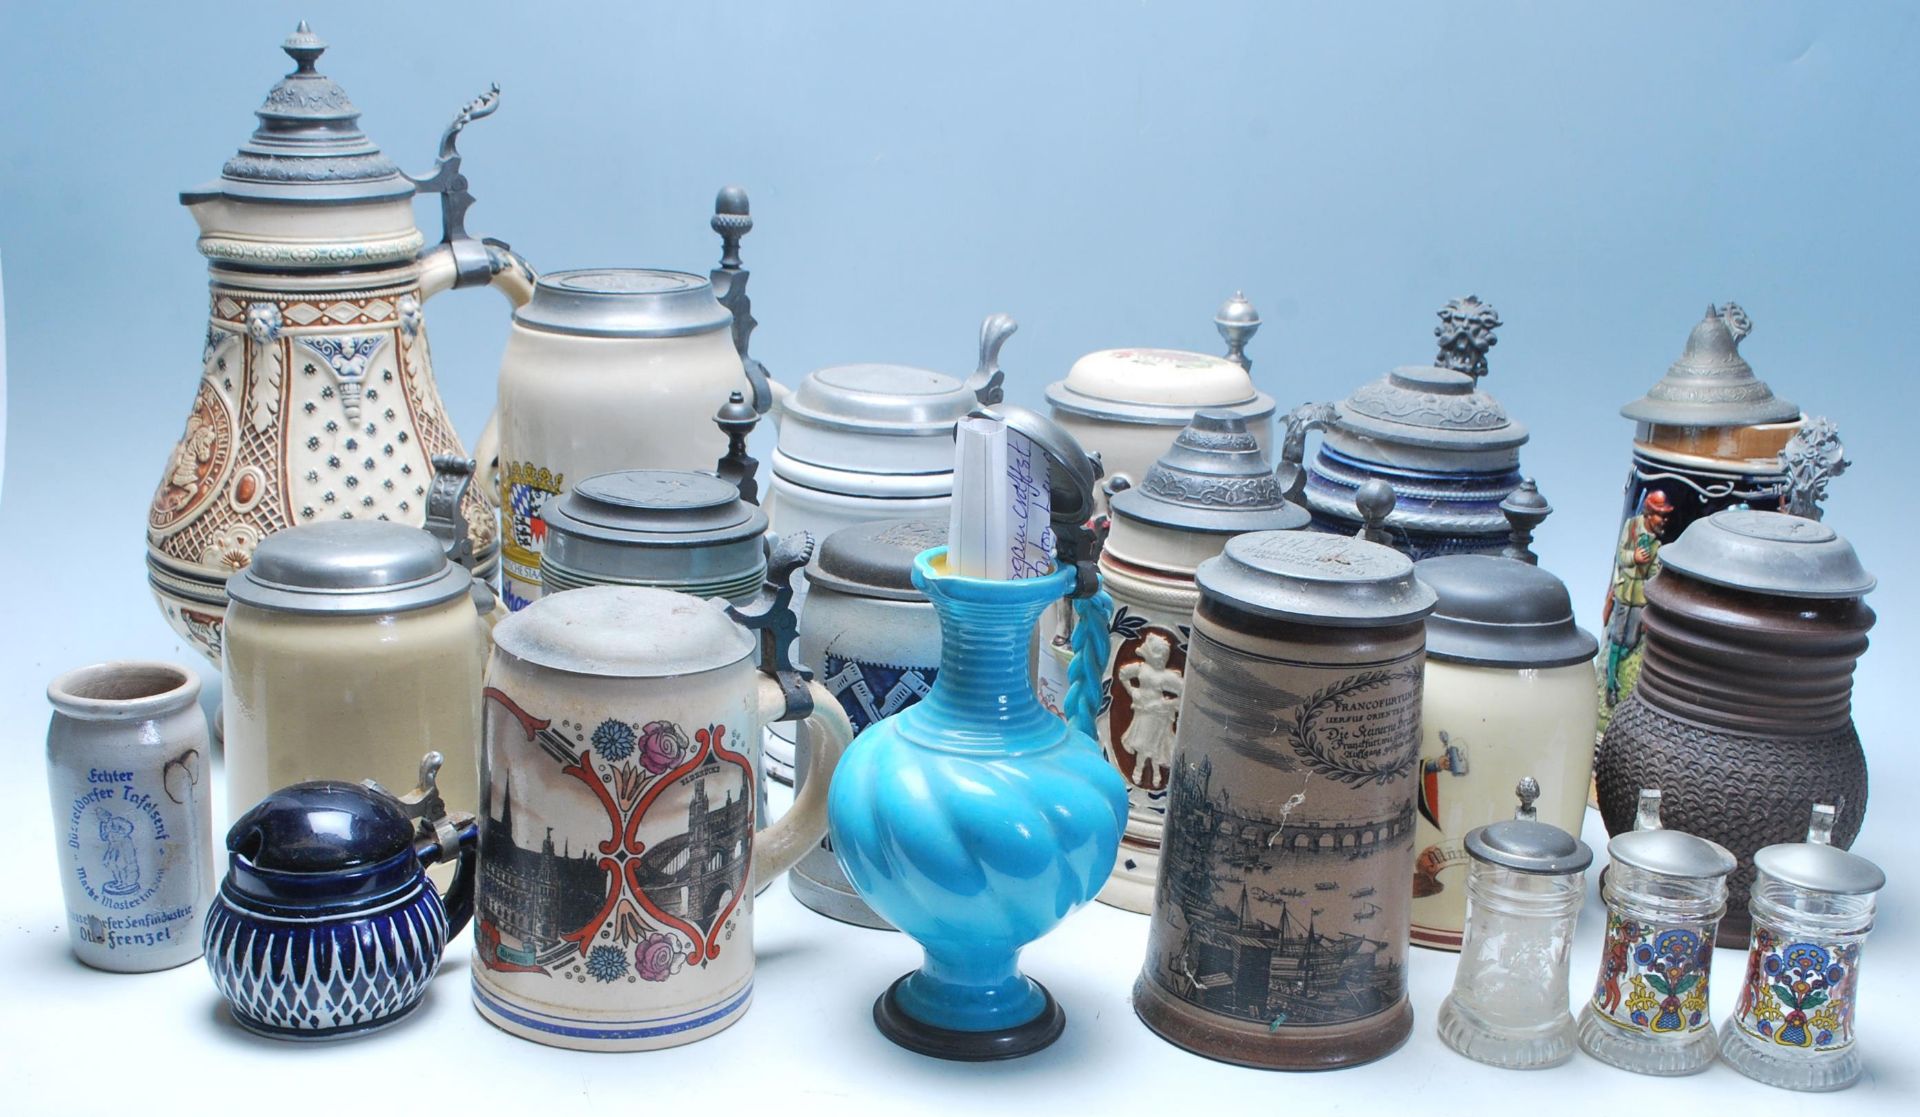 A large collection of German blue and grey stoneware jugs and beer steins, some having pewter